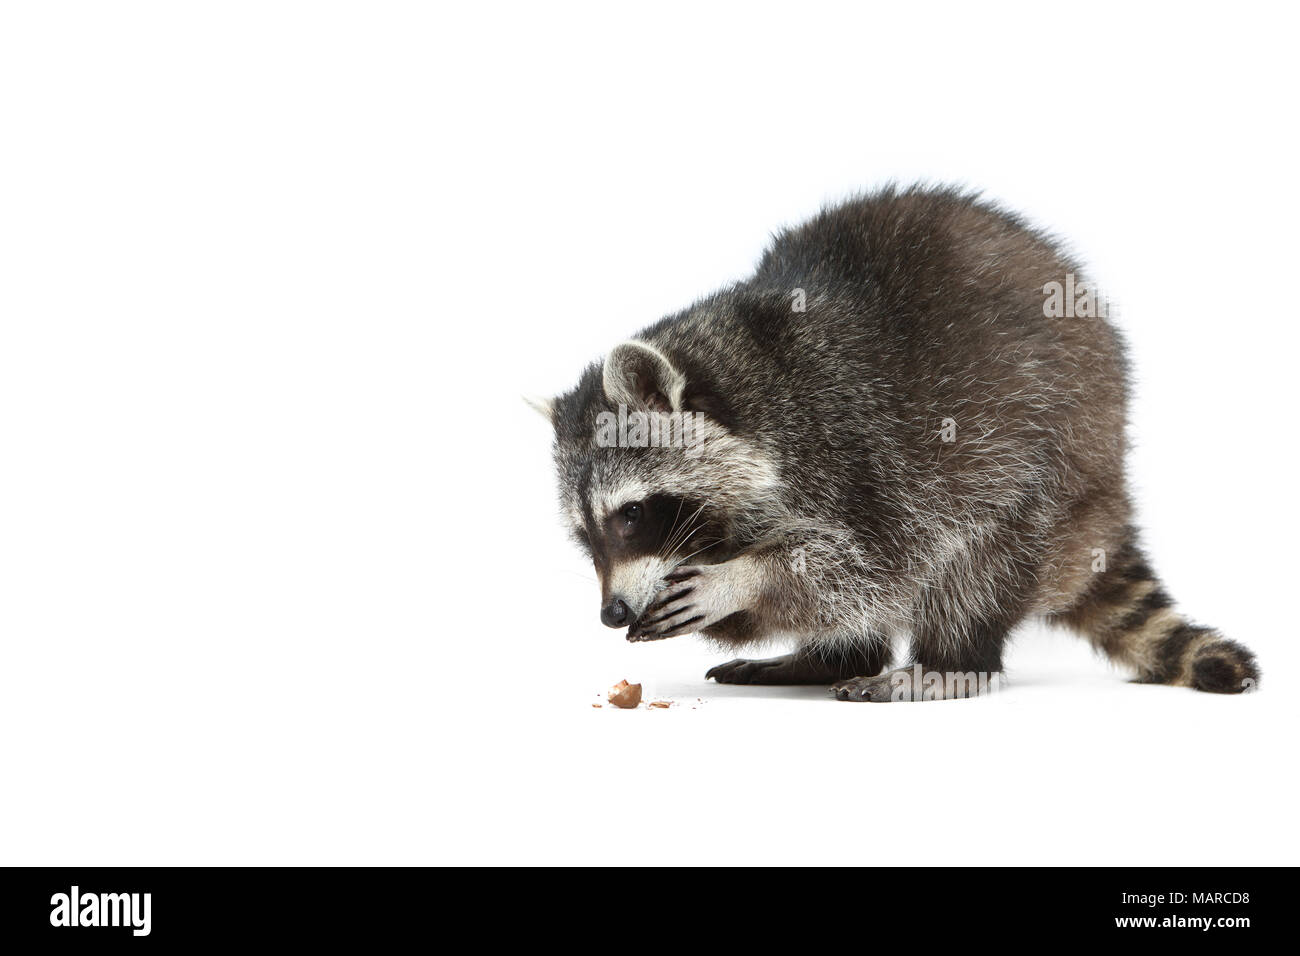 Raccoon (Procyon lotor). Adult eating, seen side-on. Studio picture against a white background. Germany Stock Photo